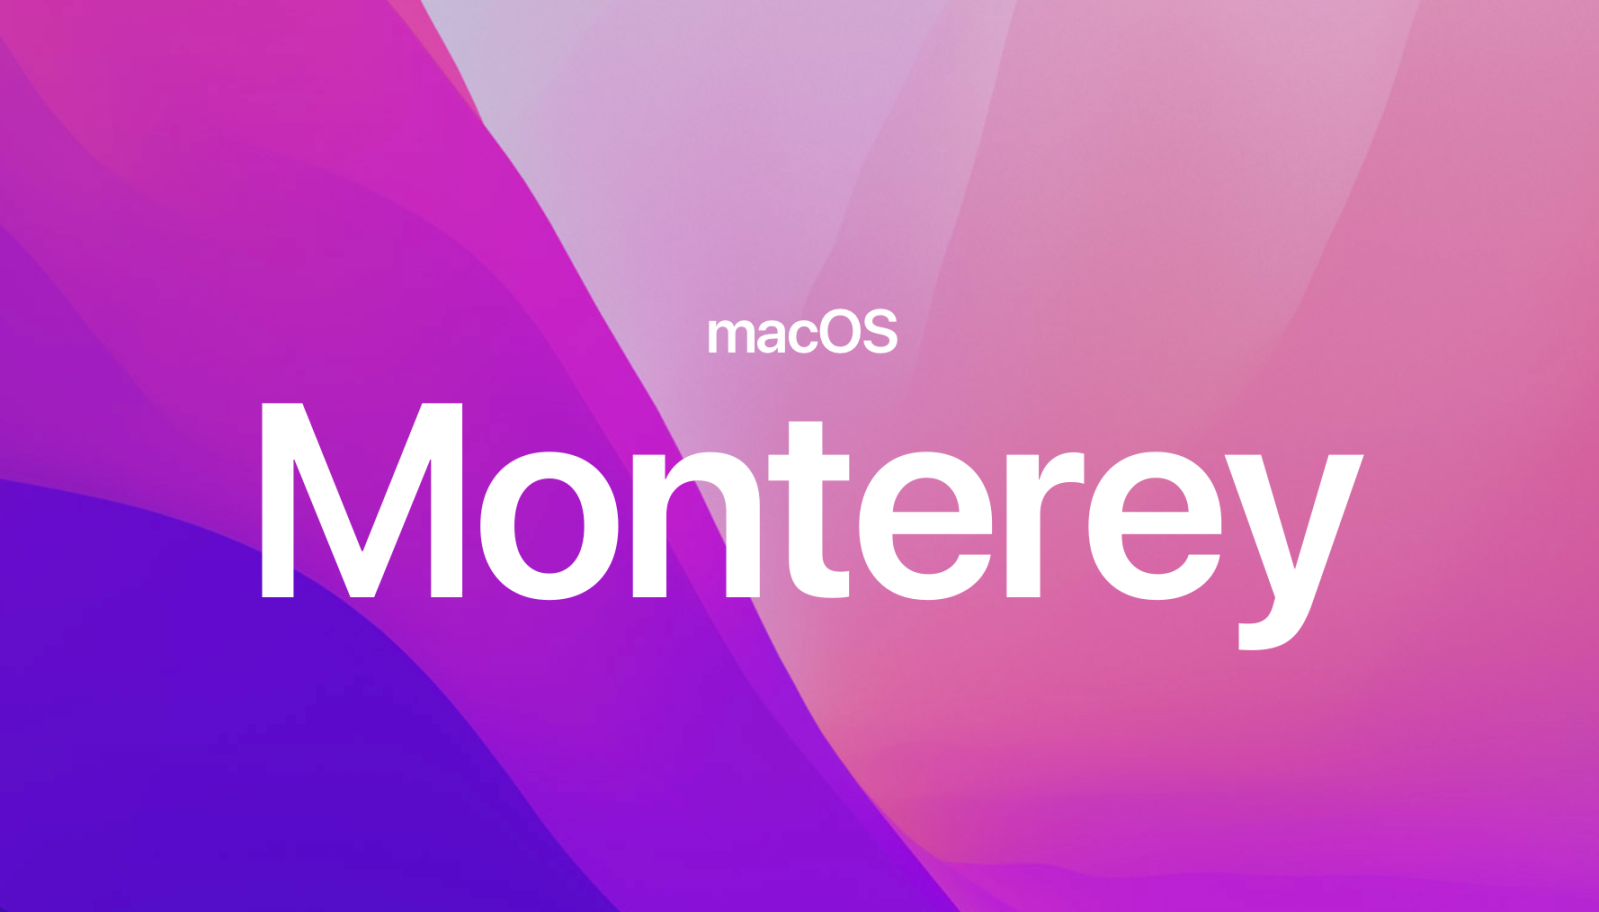 Macs compatible with macOS Monterey